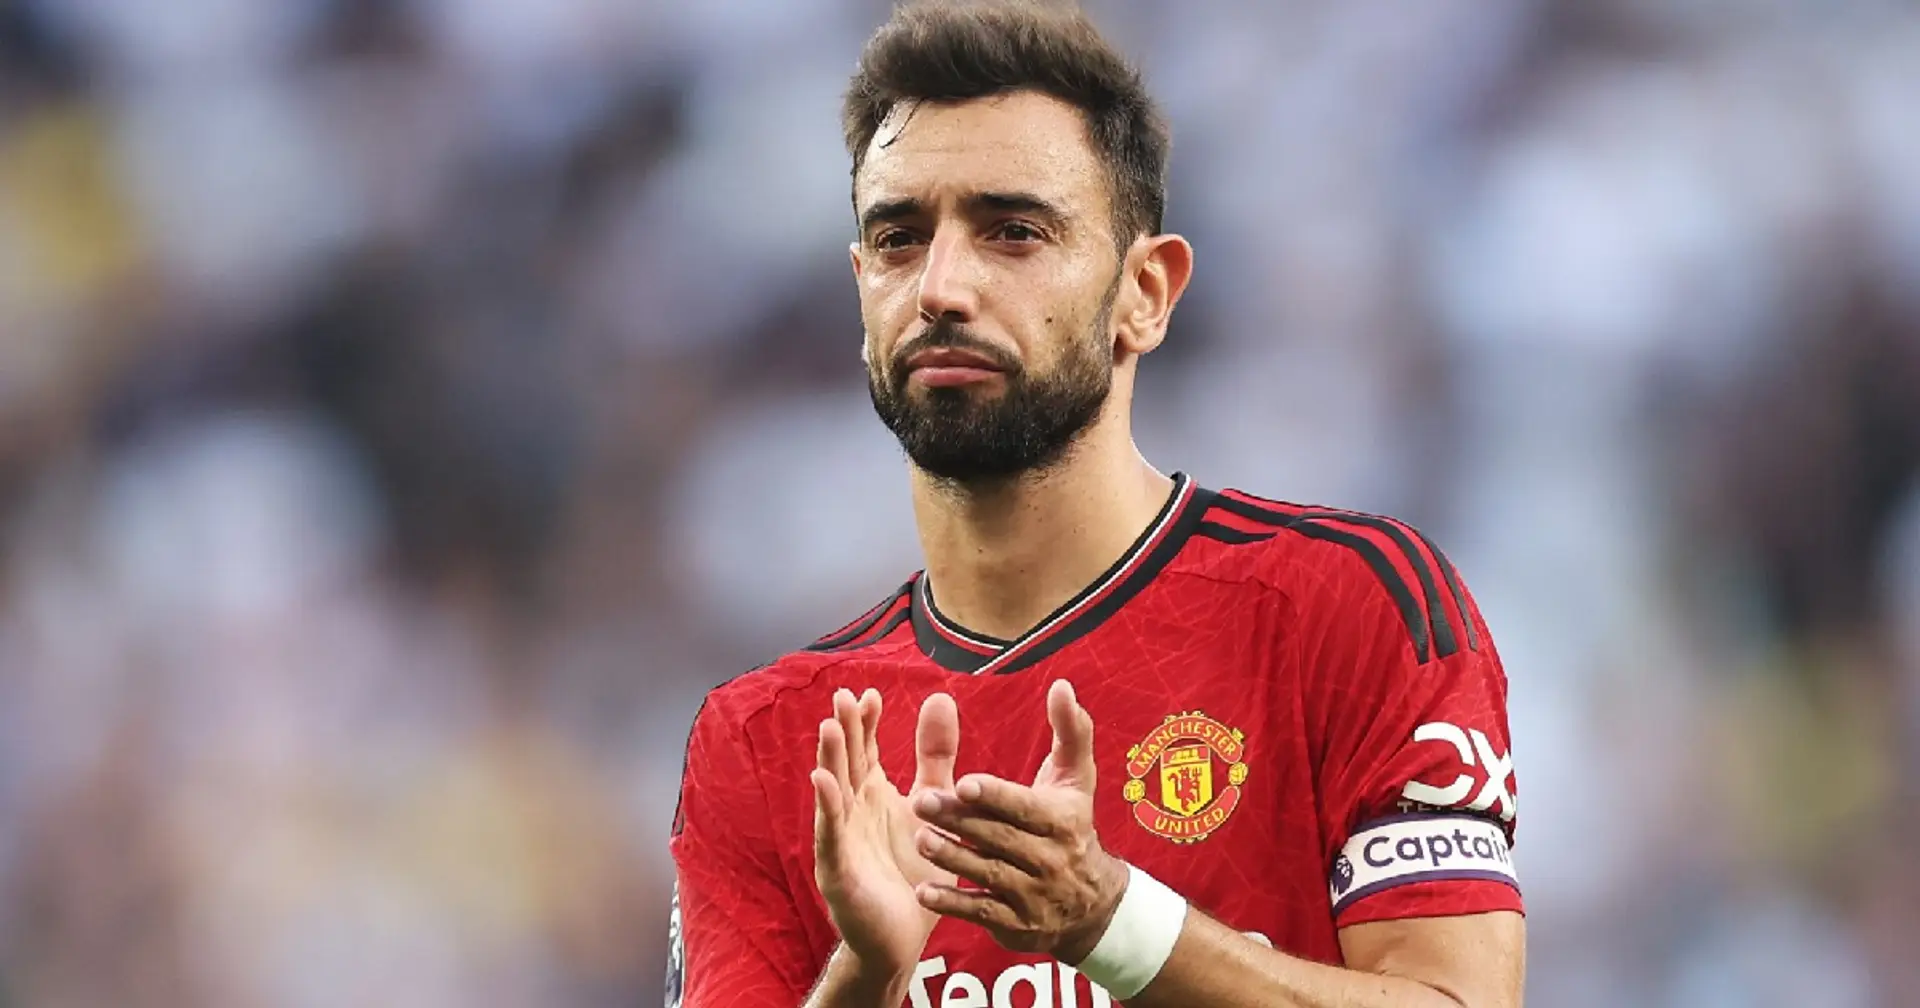 Souness: 'If Bruno Fernandes played for Liverpool, he would be a fantastic player'